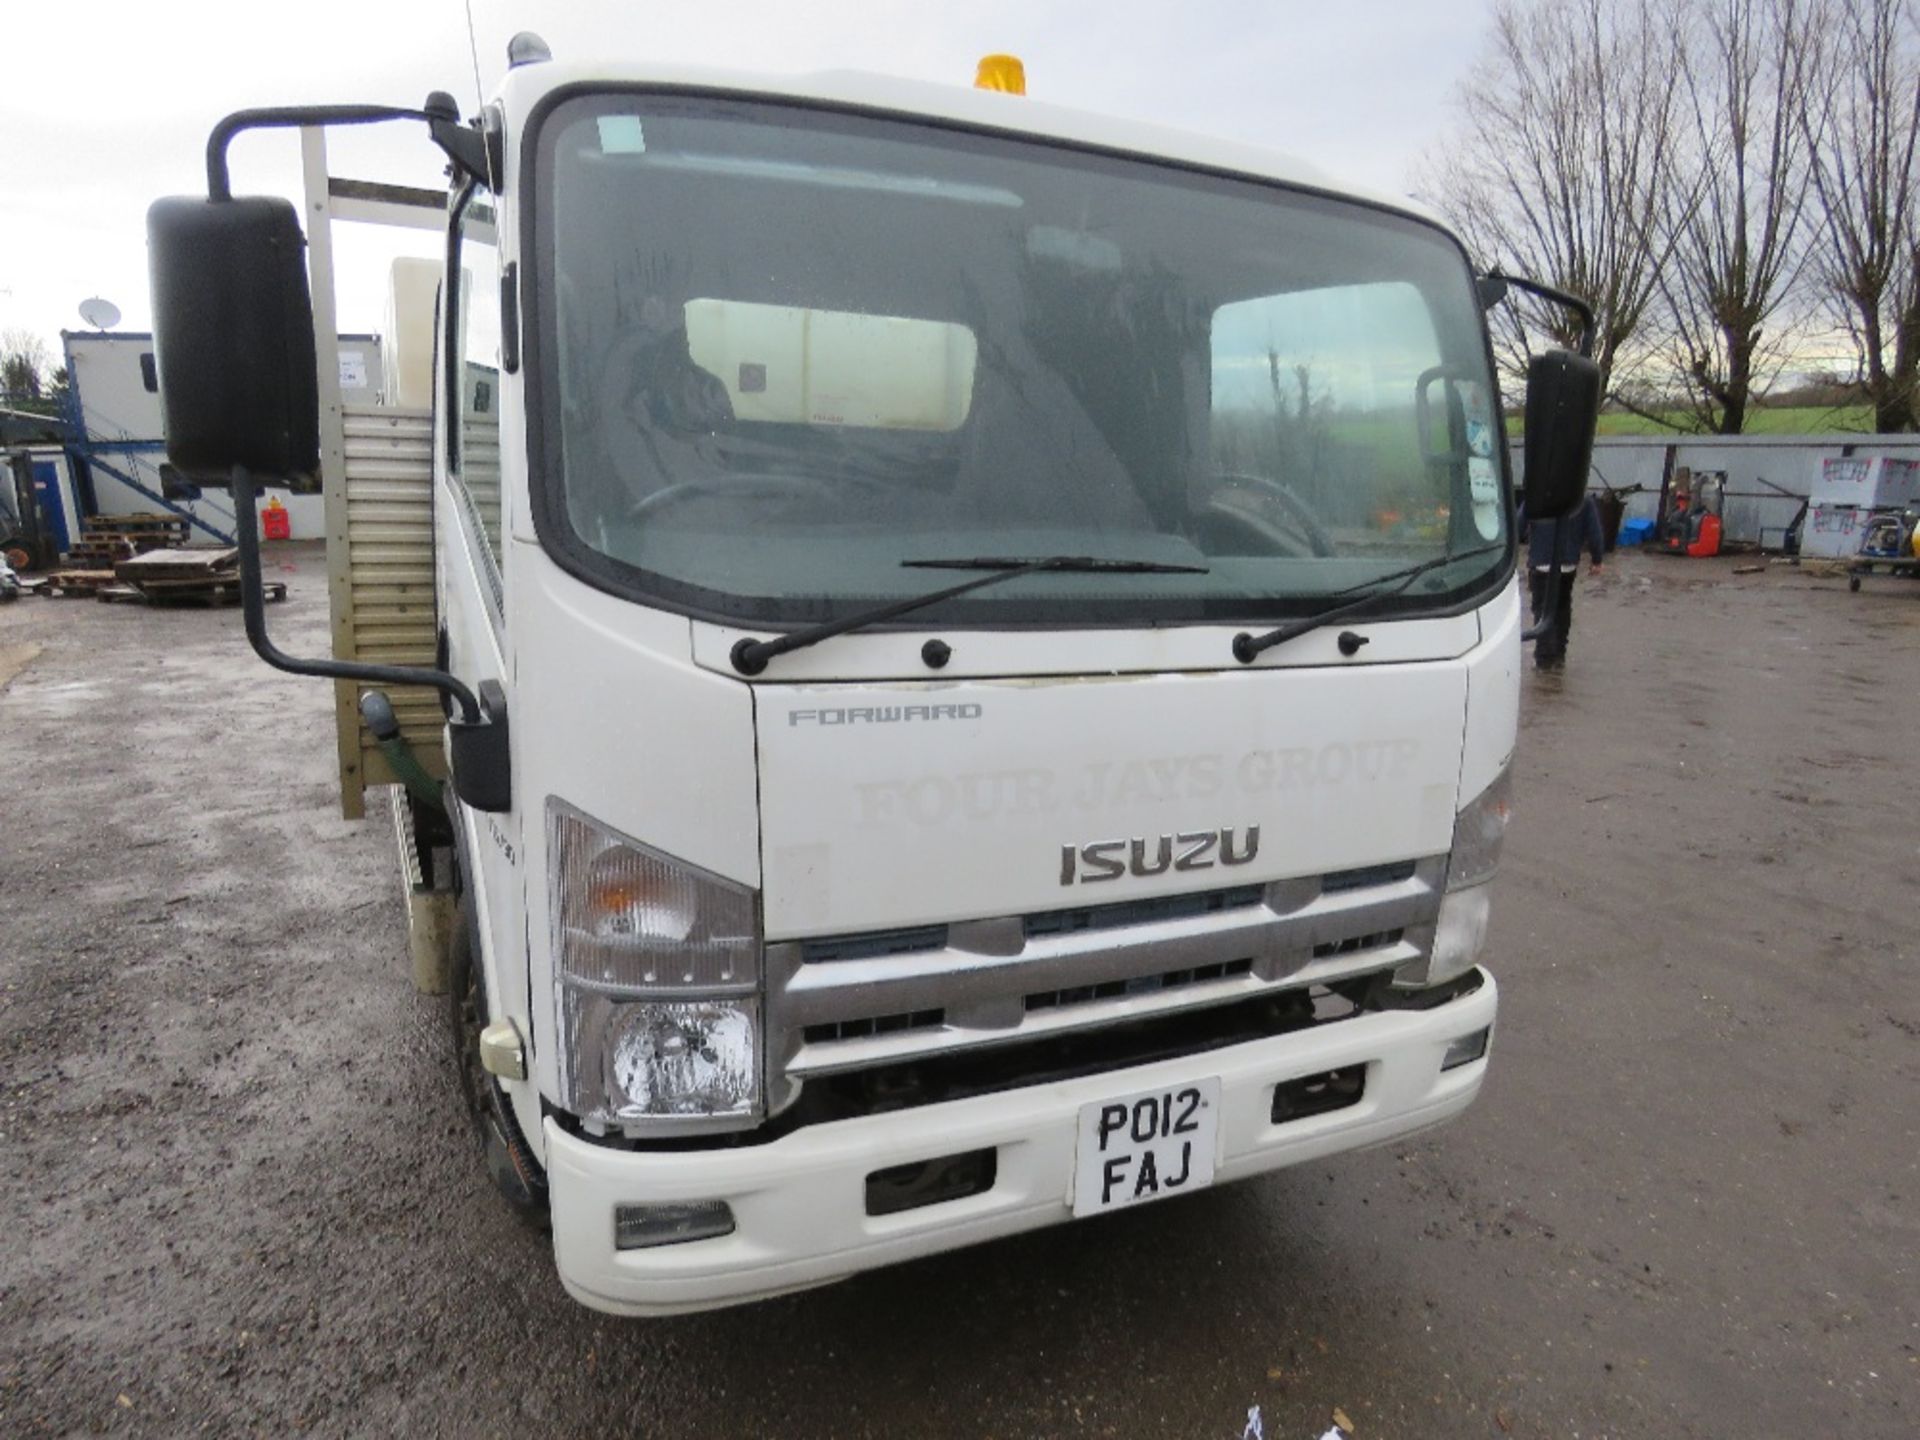 ISUZU 7500KG PORTABLE TOILET SERVICE TRUCK REG:PO12 FAJ. WITH V5, OWNED FROM NEW, 70,521REC MILES. - Image 2 of 17